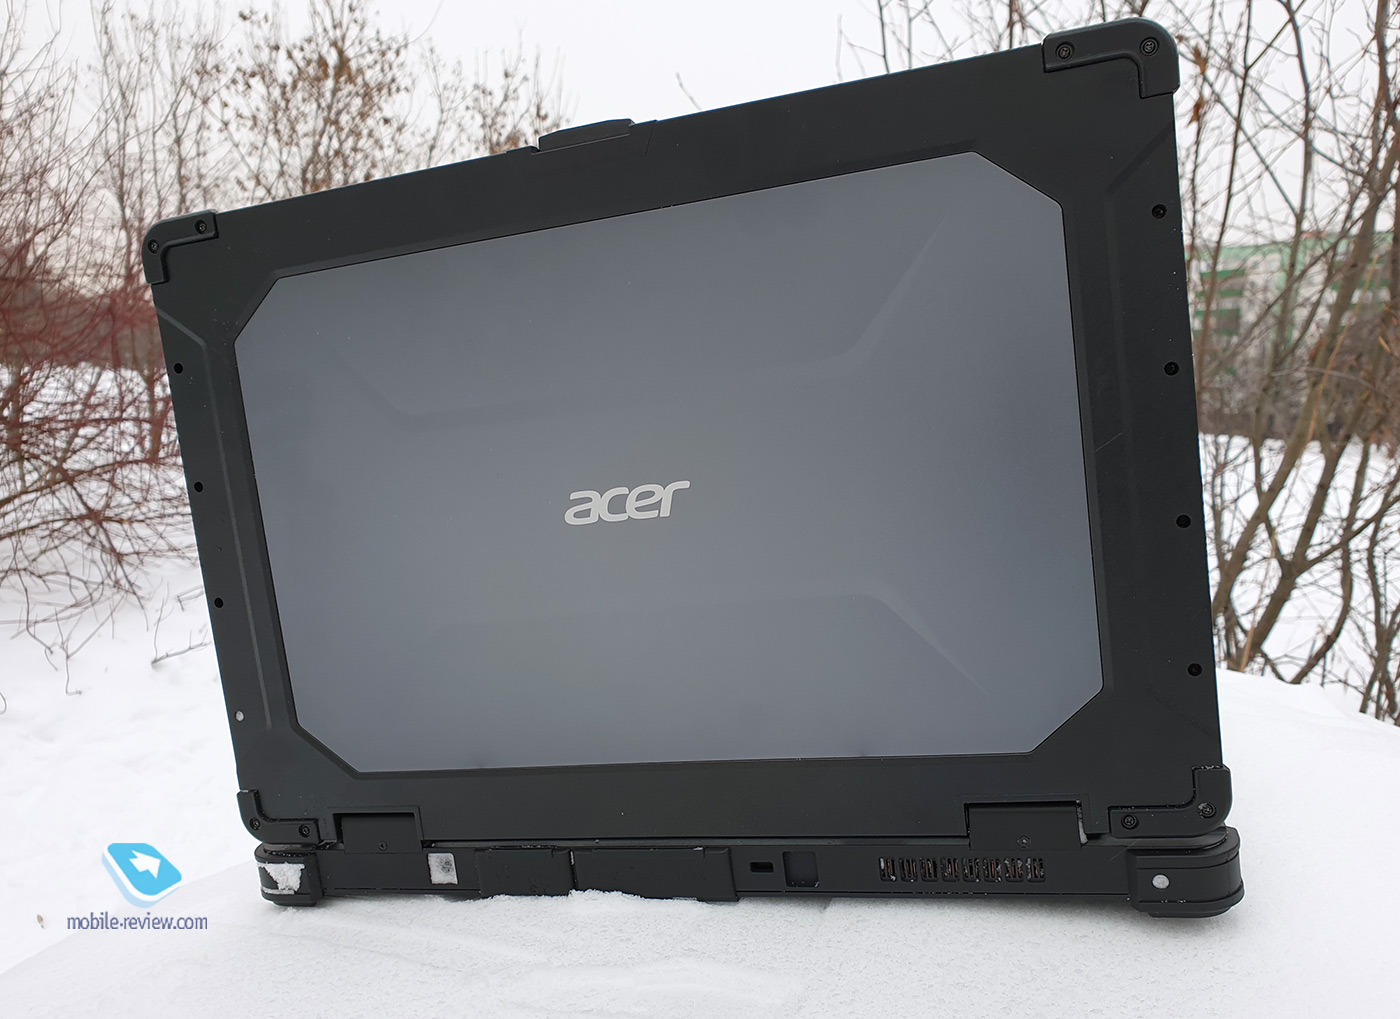 Rugged Acer ENDURO N7 laptop: to make work stand out